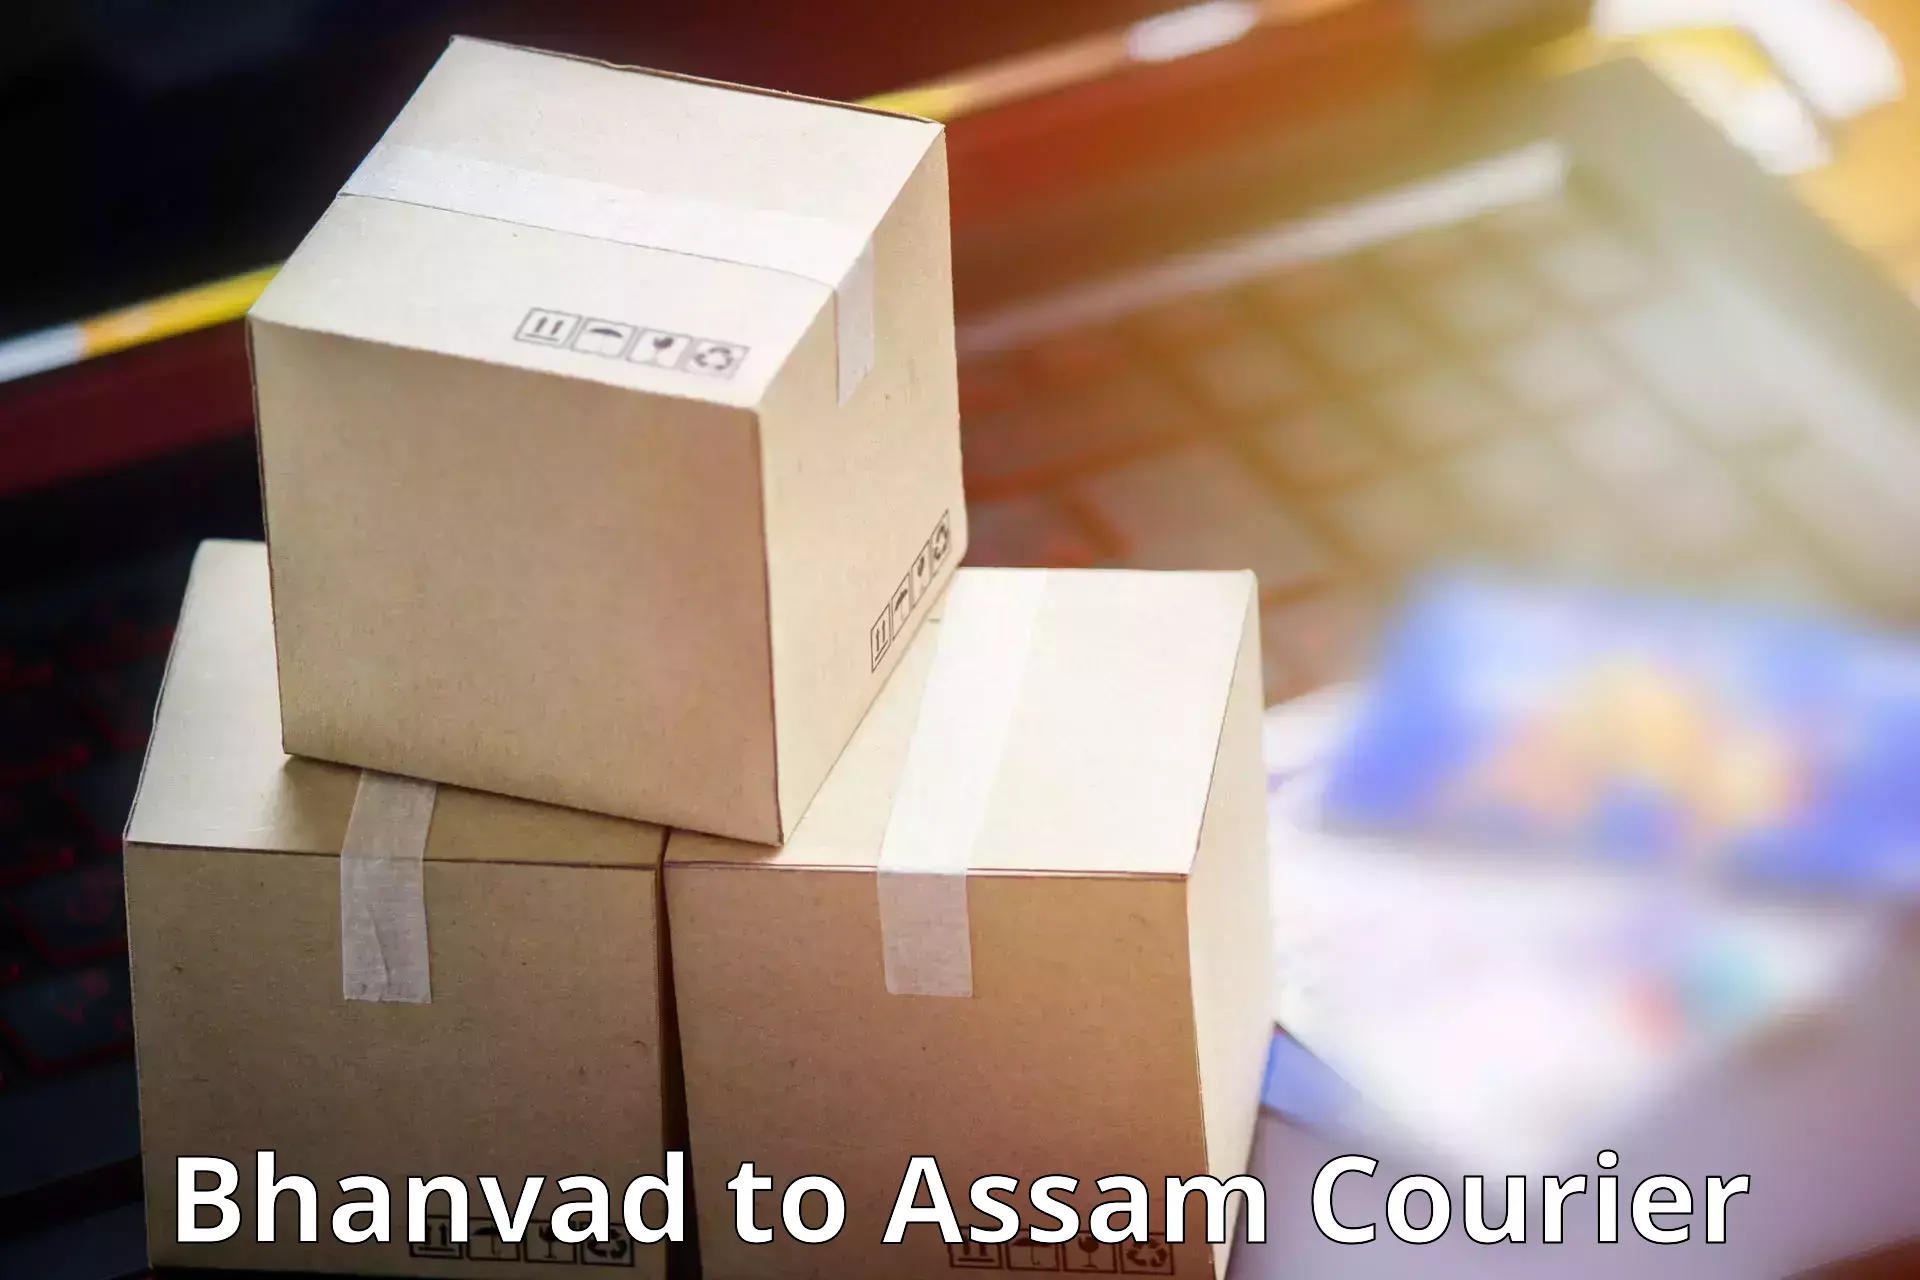 Reliable courier service Bhanvad to Thelamara